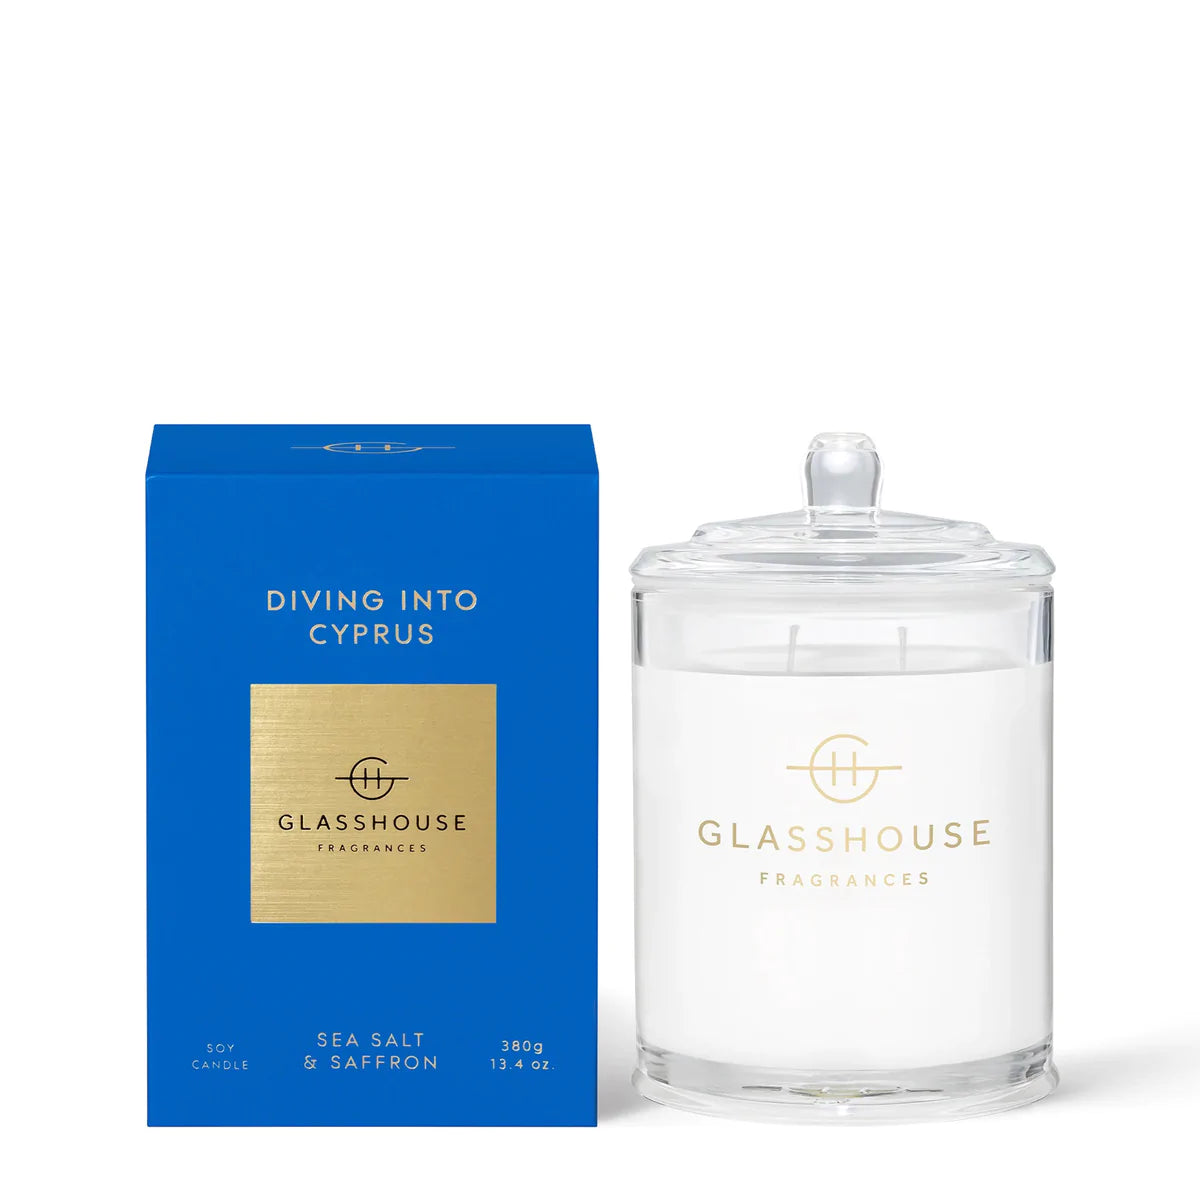 Glasshouse Fragrances Triple Scented Soy Candle (13.4 oz)